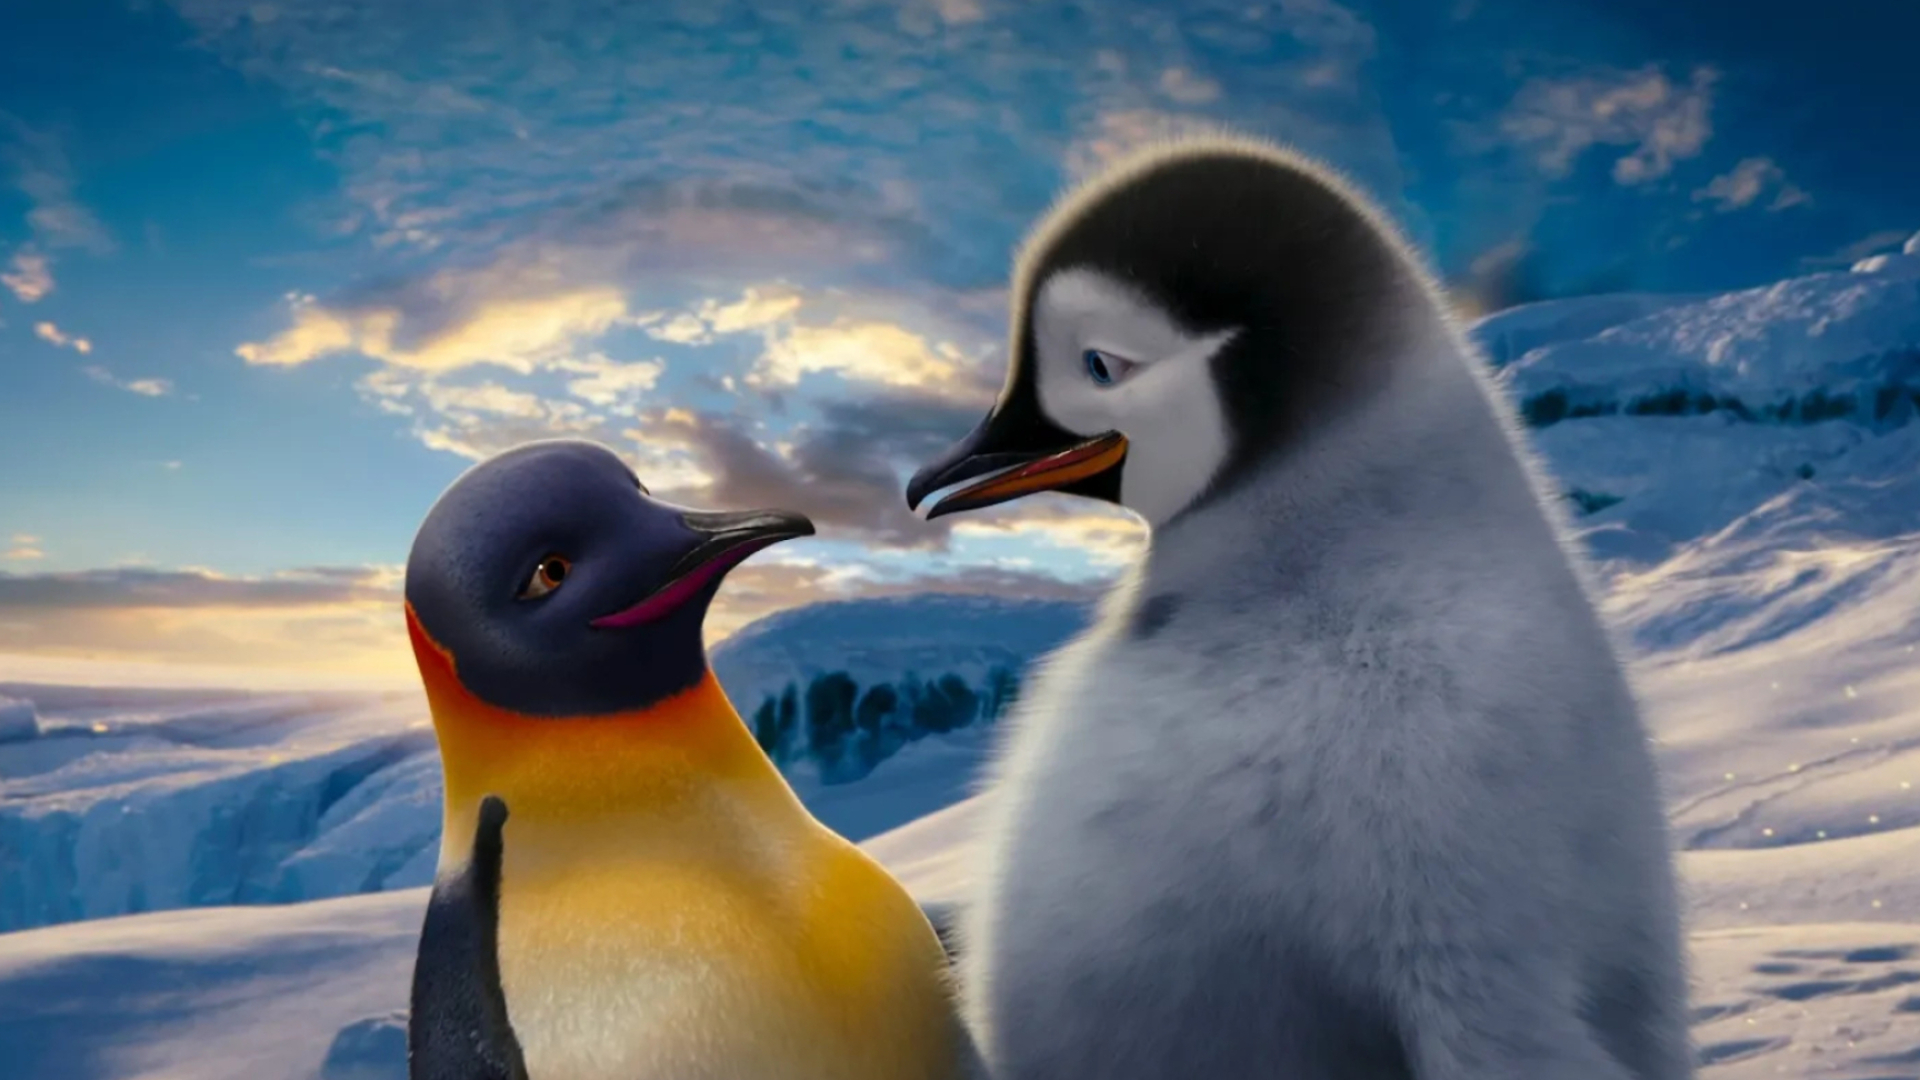 Happy Feet, 3D movie review, Animated penguins, Engaging storytelling, 1920x1080 Full HD Desktop